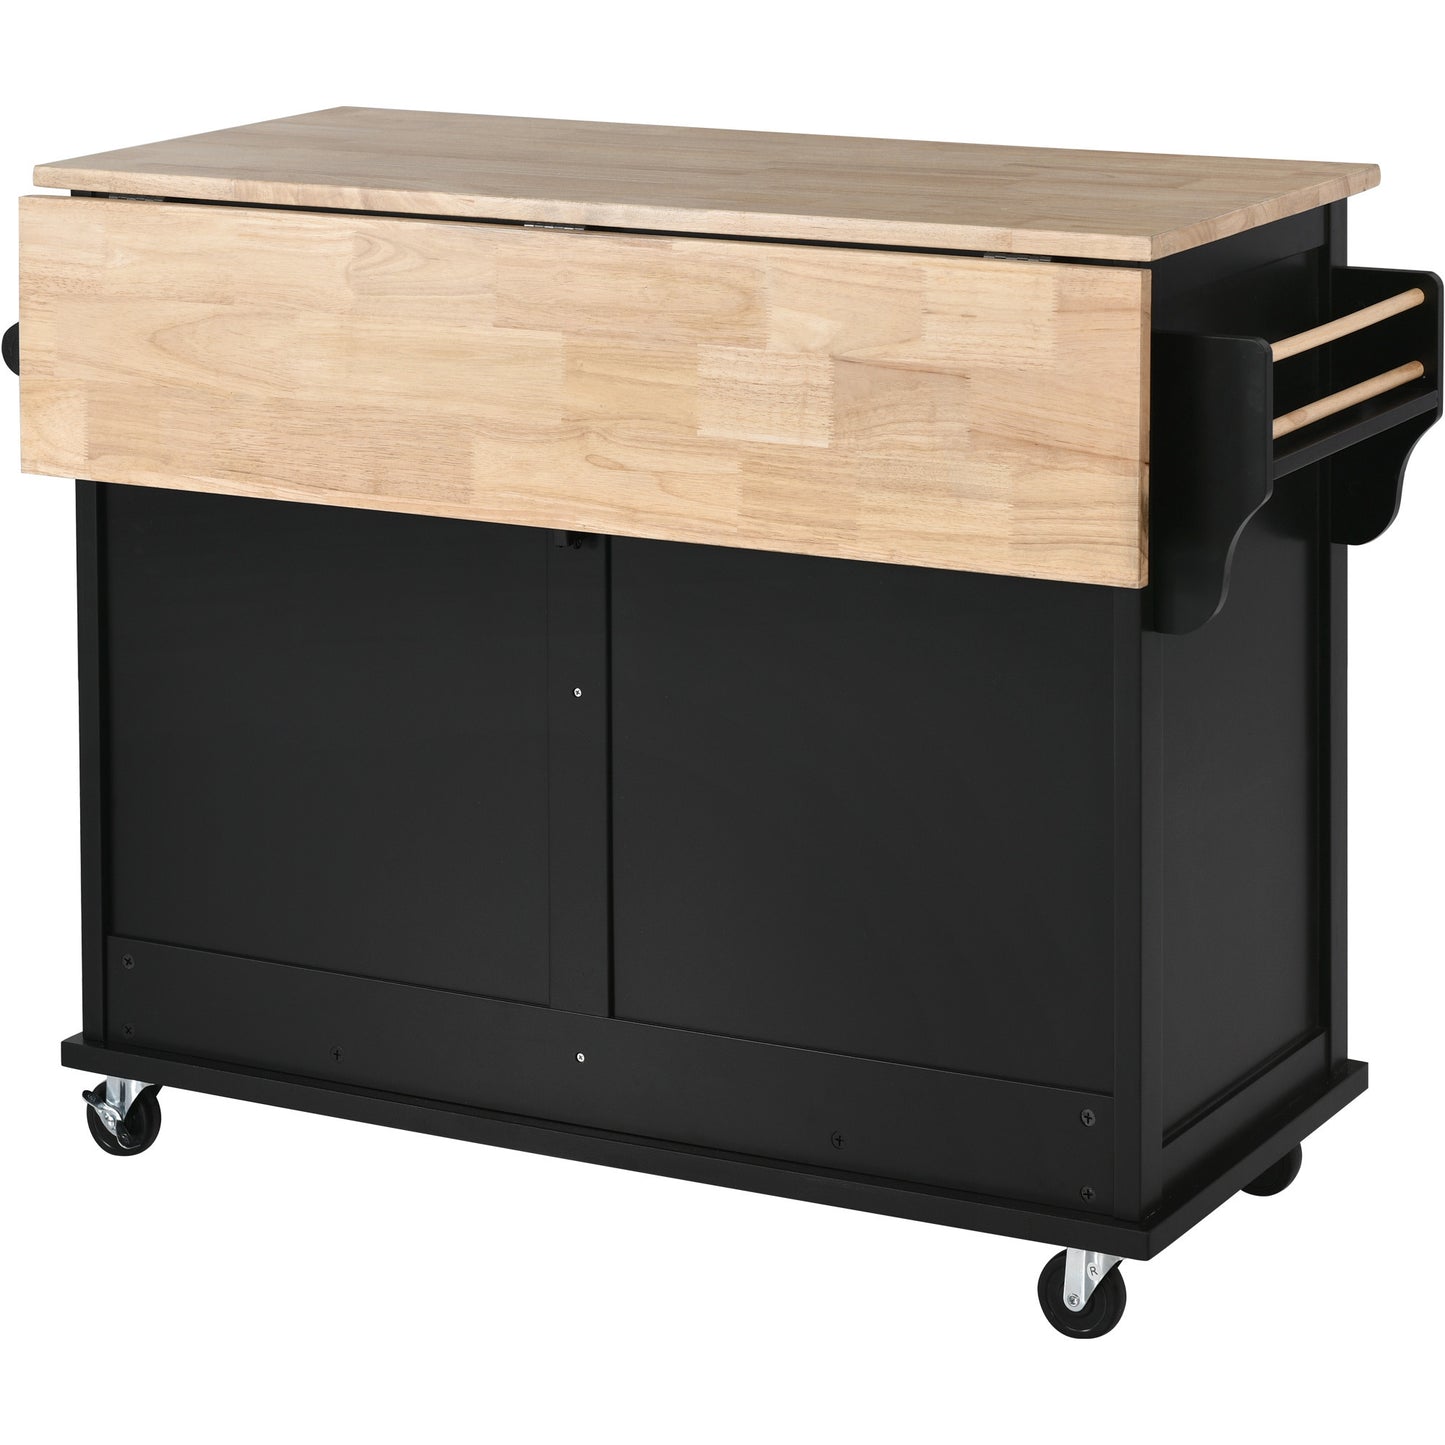 Kitchen Cart with Rubber wood Drop-Leaf Countertop, Concealed sliding barn door adjustable height,Kitchen Island on 4 Wheels with Storage Cabinet and 2 Drawers,L52.2xW30.5xH36.6 inch, Black